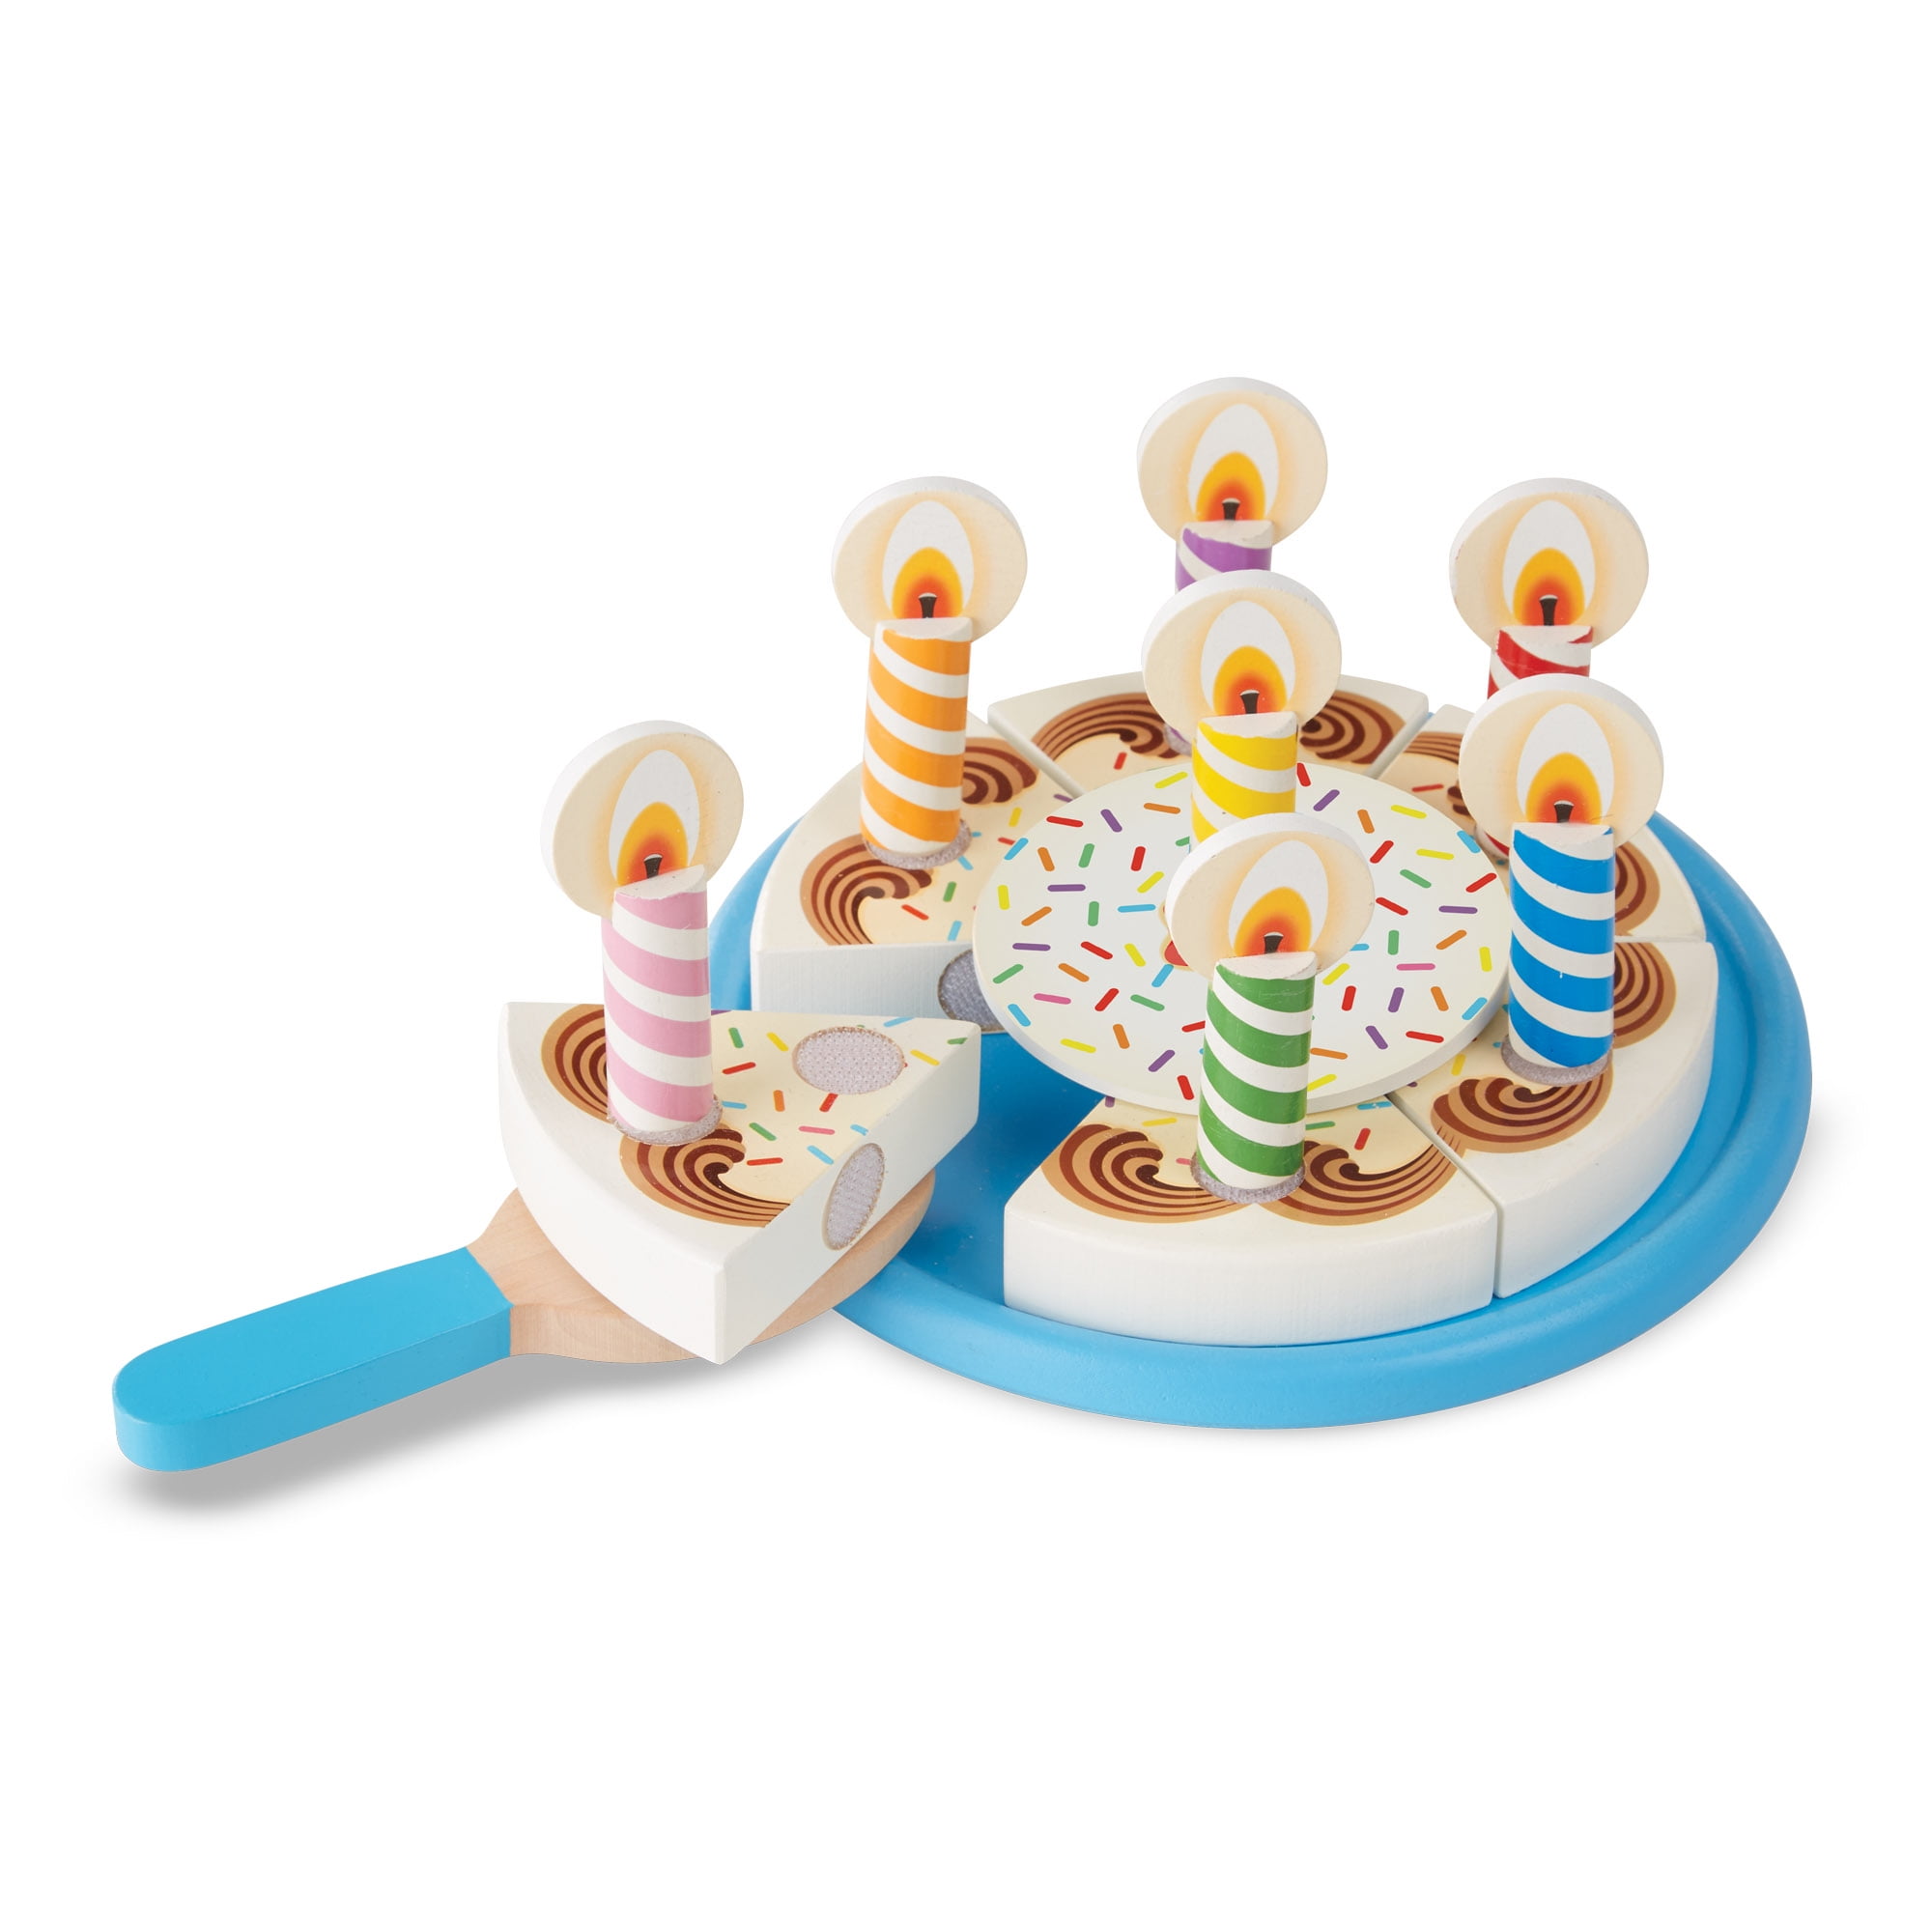 Triple-layer Party Cake Wooden Play Food Kitchen Grocery Melissa & Doug 4069 for sale online 